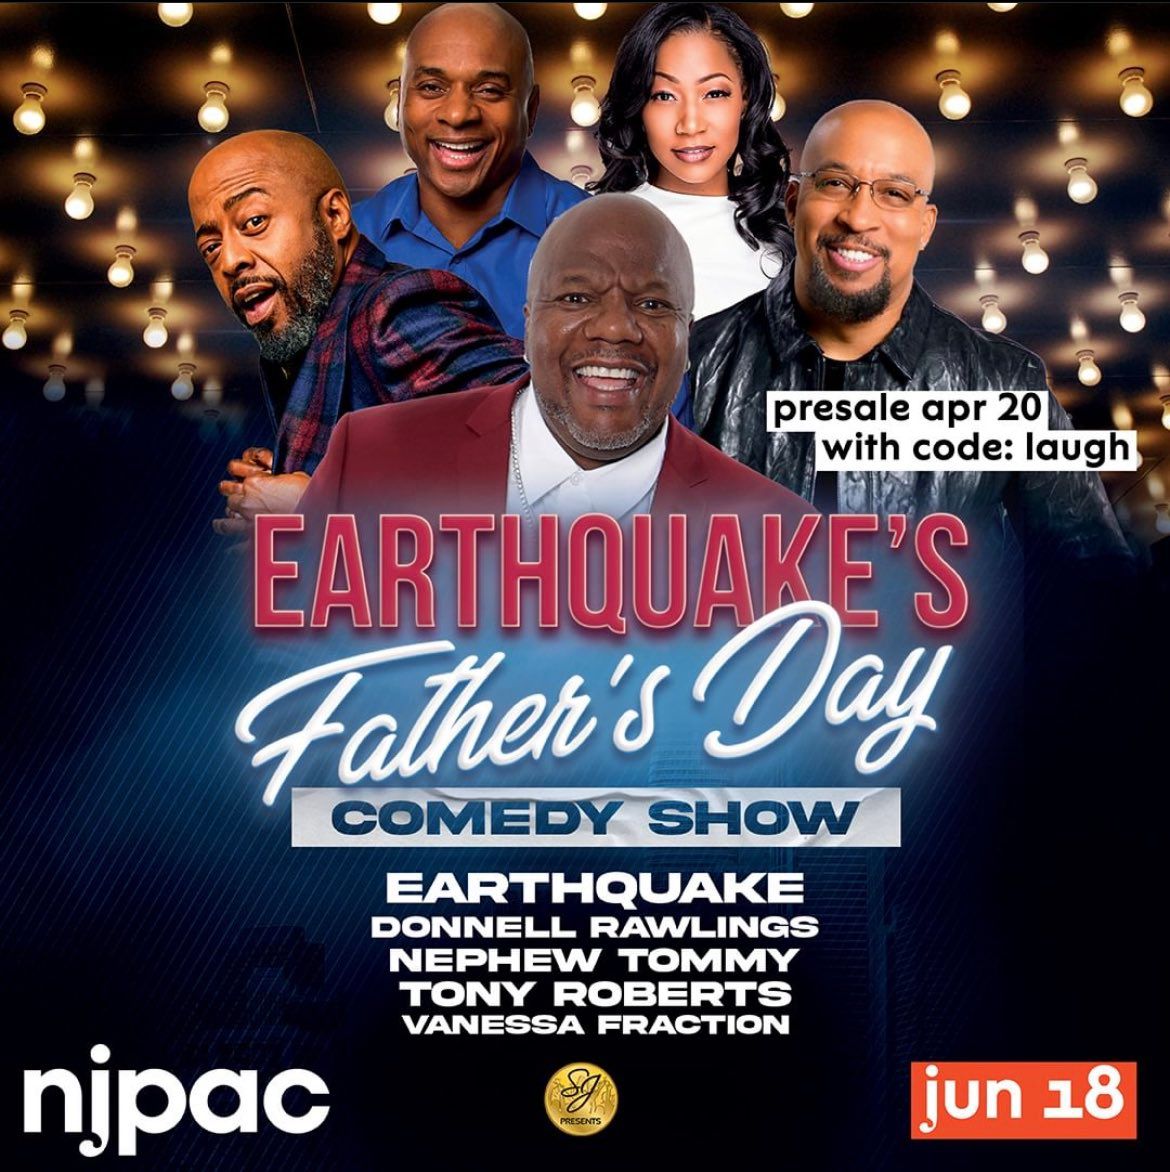 Earthquakes Fathers Day Comedy Show